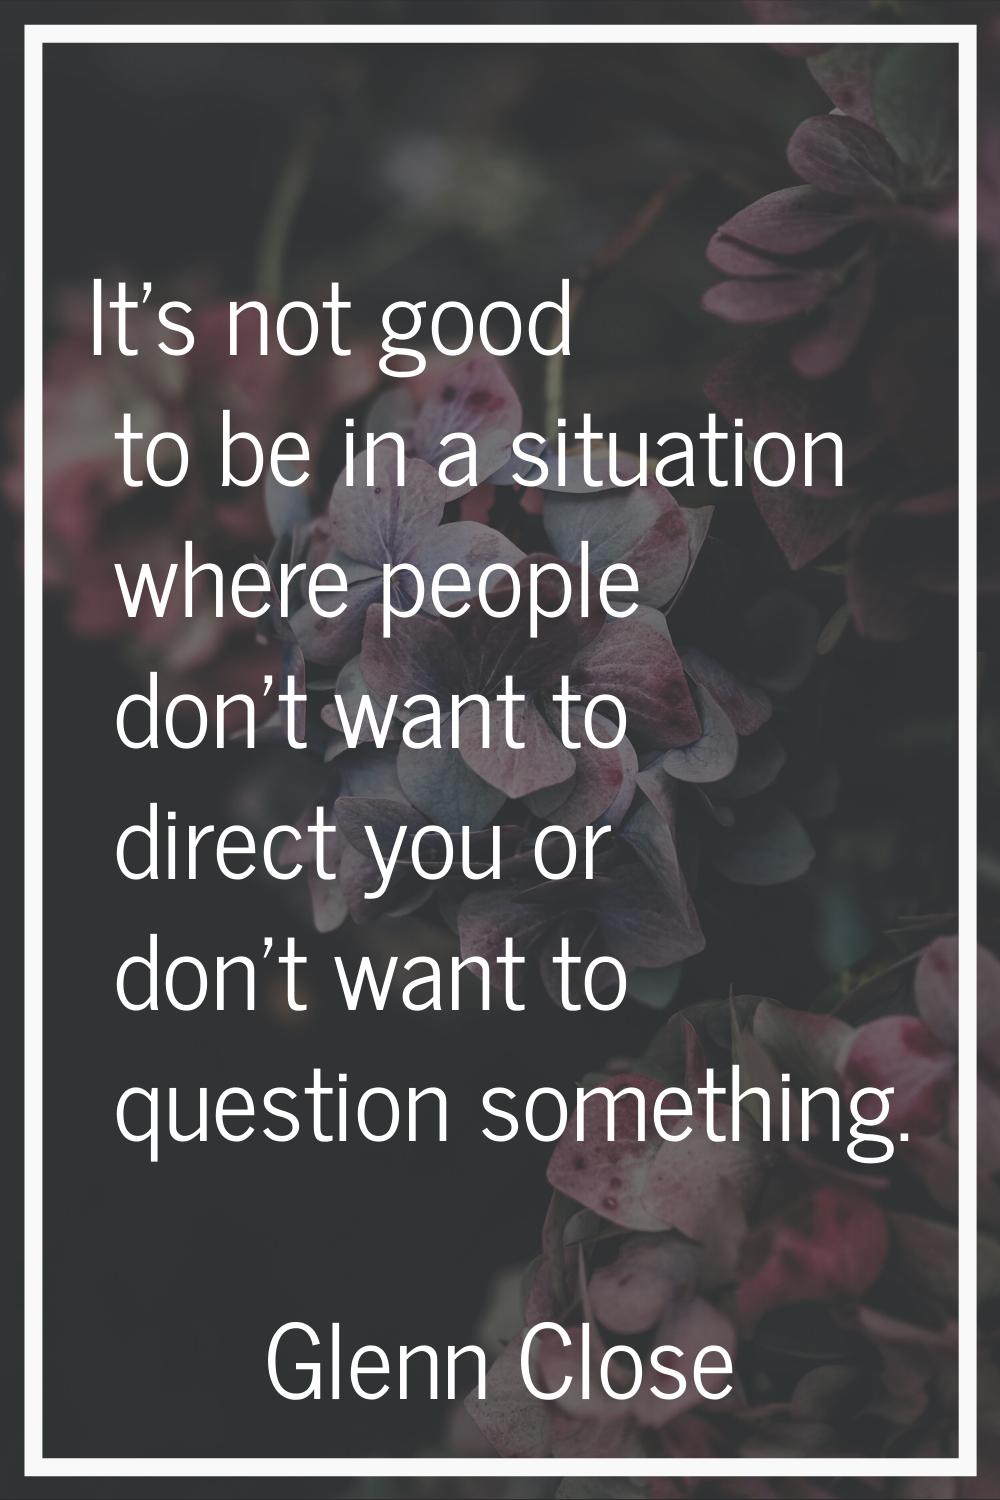 It's not good to be in a situation where people don't want to direct you or don't want to question 